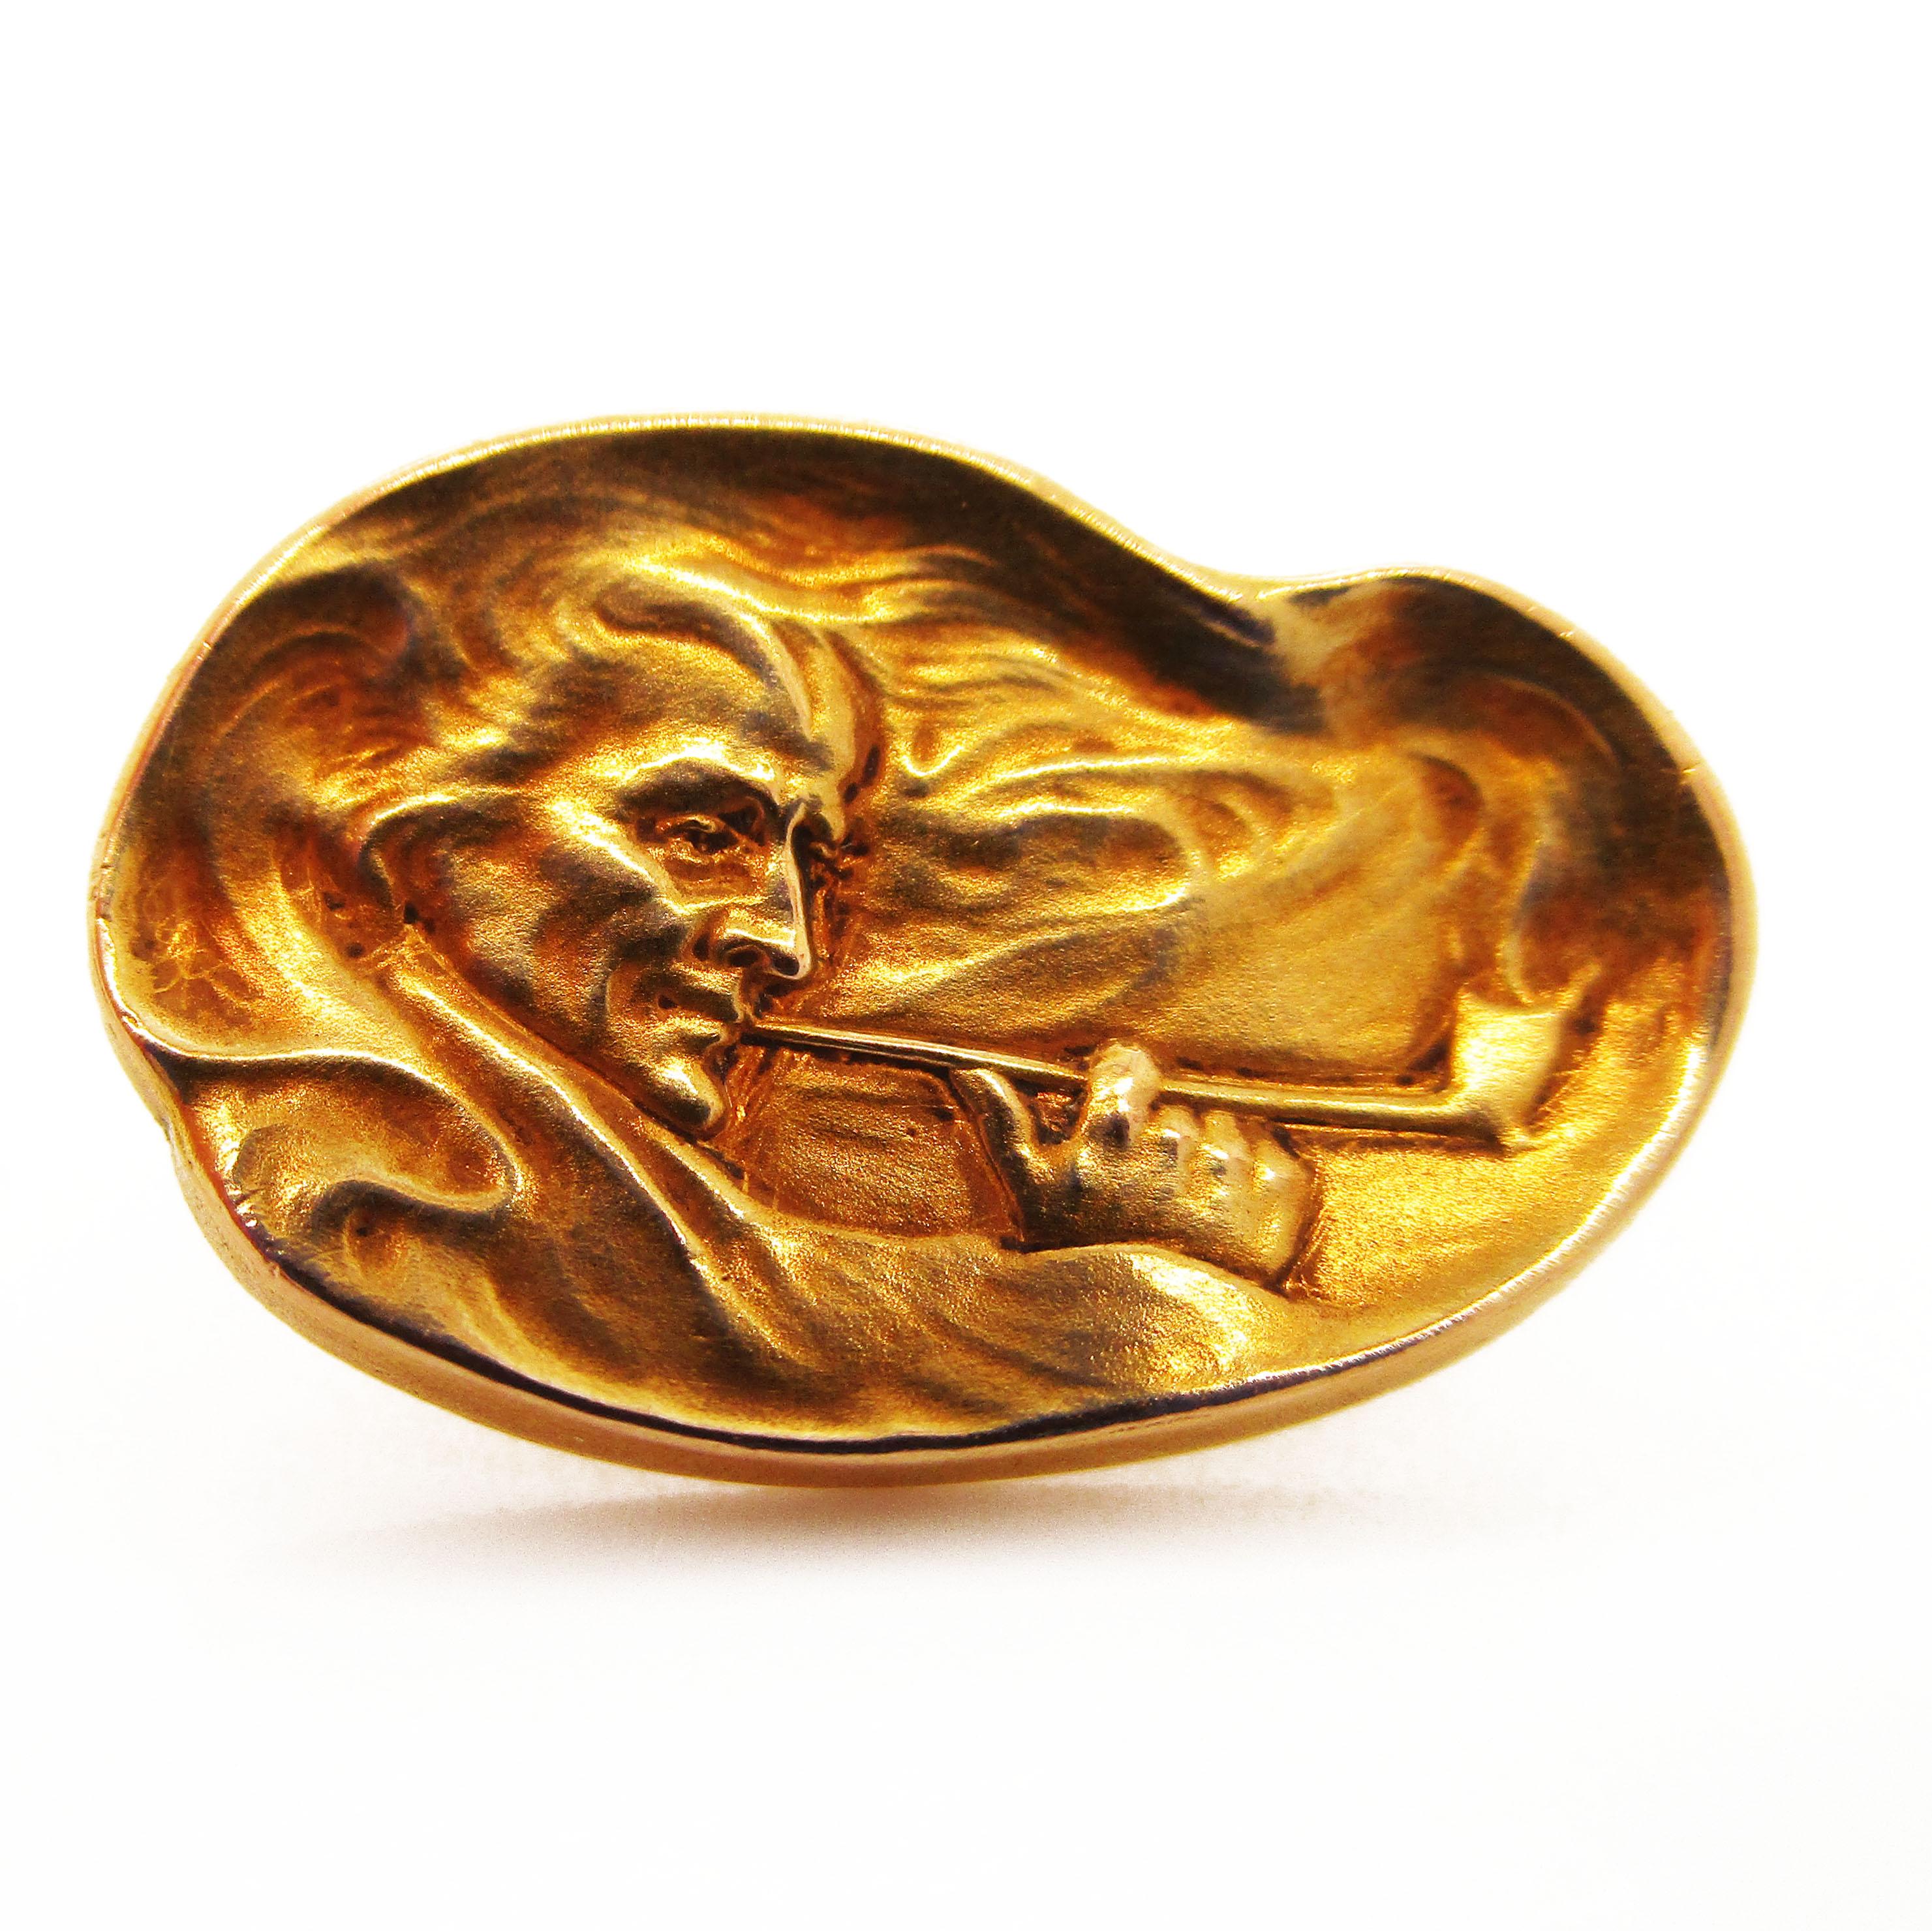 1890 Art Nouveau 14 Karat Yellow Gold Whiteside and Blank Smoking Man Cufflinks In Excellent Condition For Sale In Lexington, KY